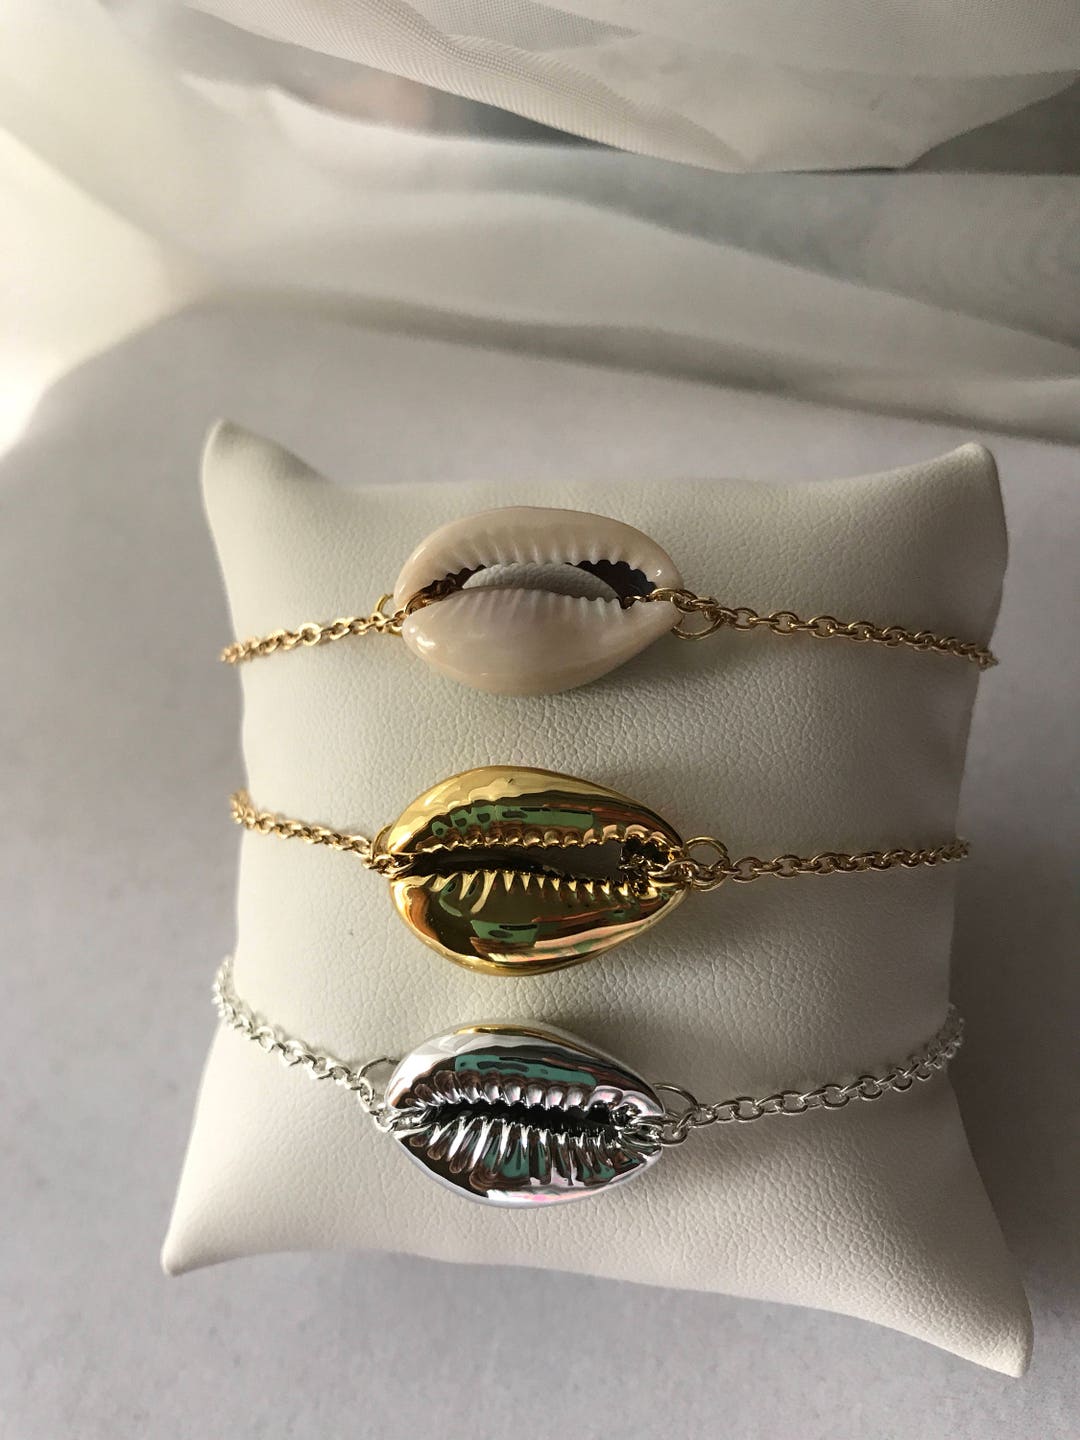 WT-B308 Hot sale Genuine cowrie shell gold color chain bracelet, Populared cowrie  gold color charm bracelet in adjustable size - AliExpress